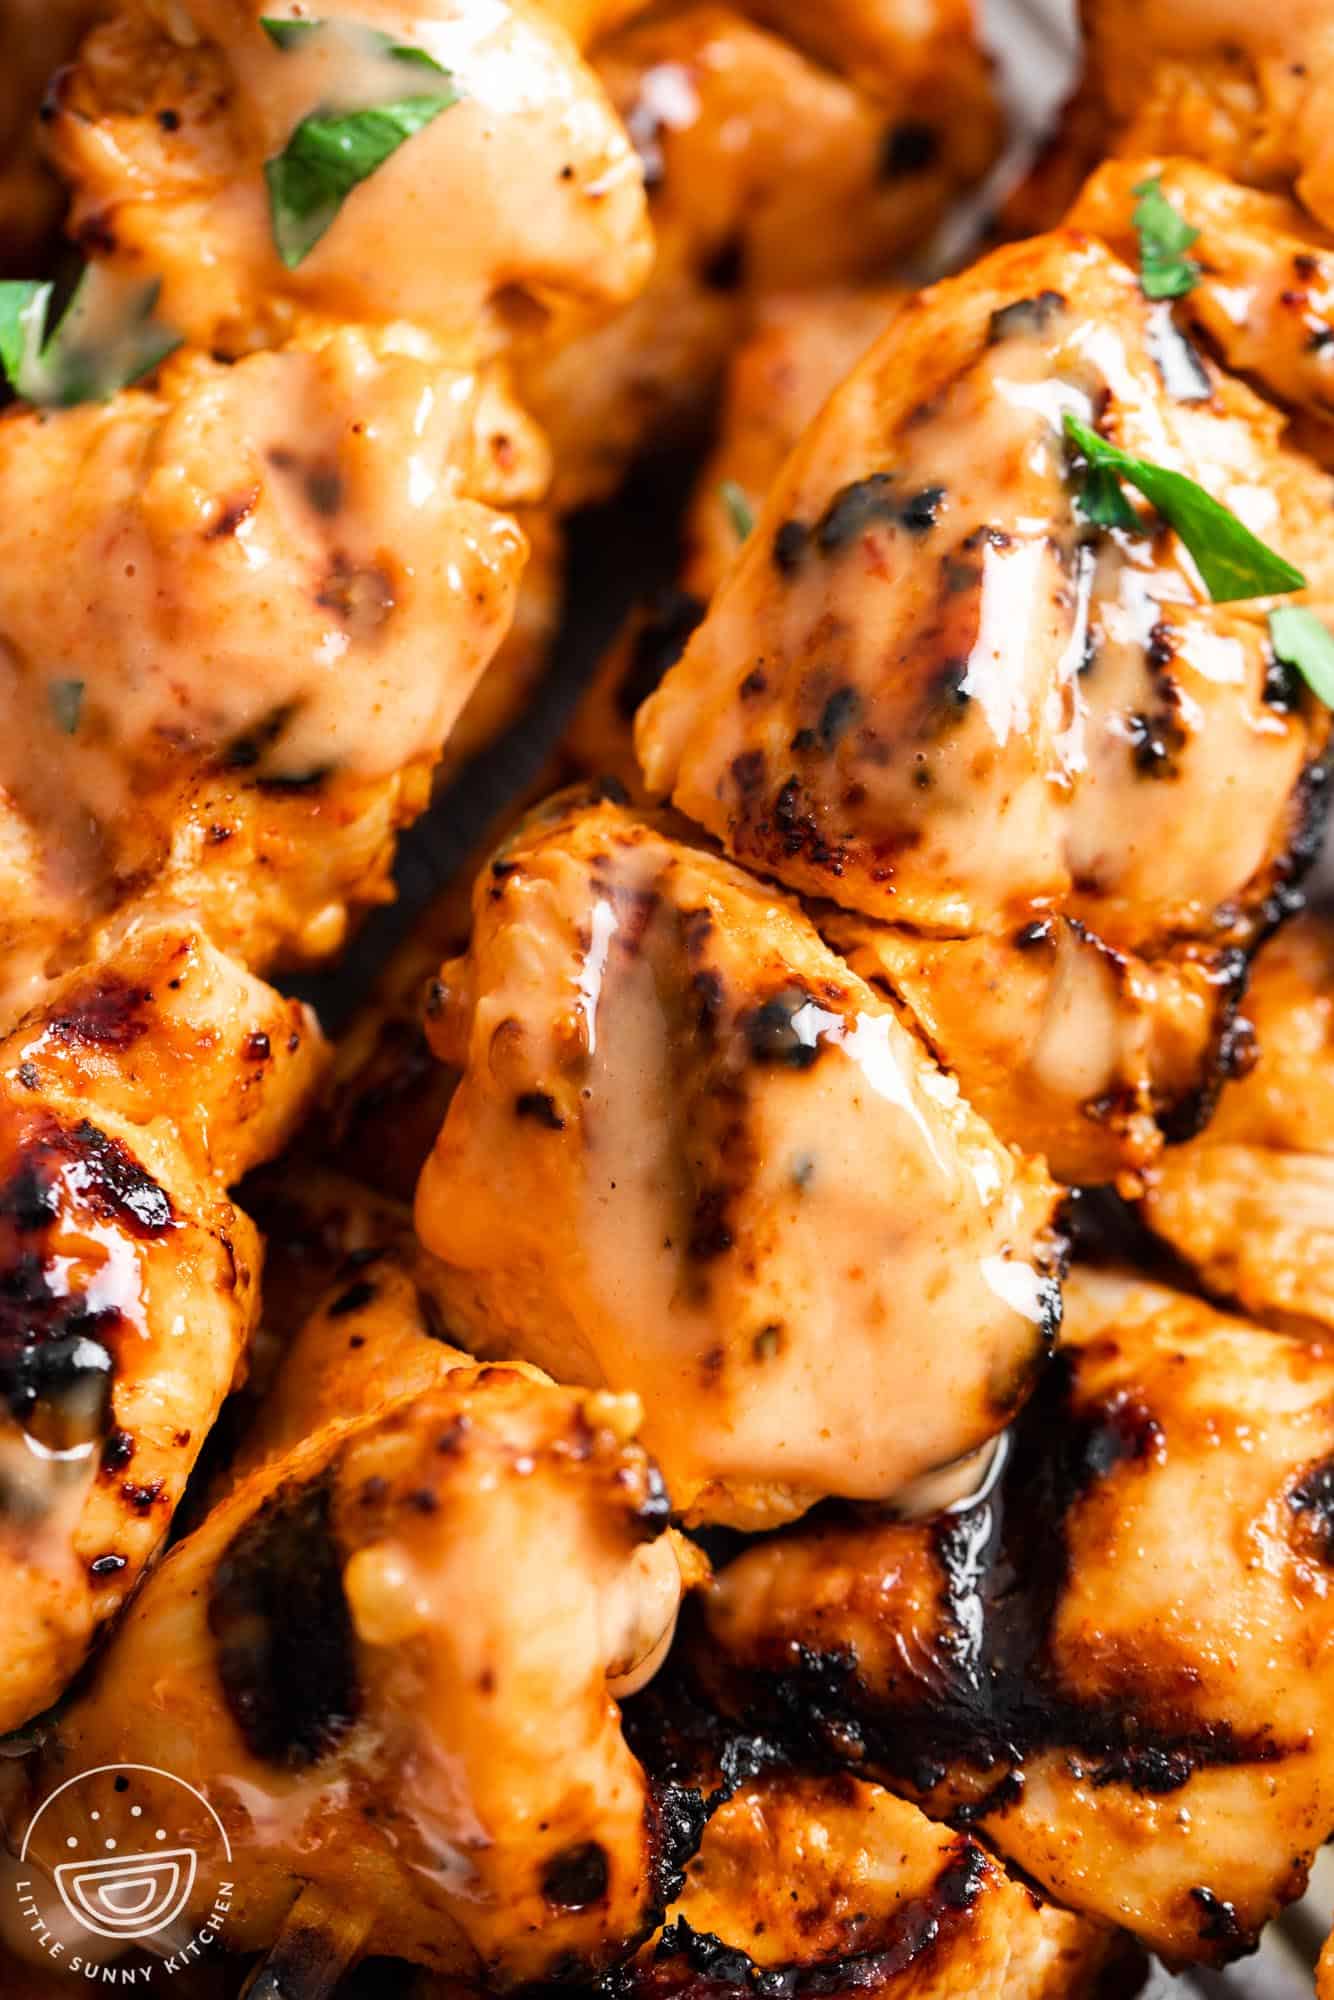 grilled chicken skewers with bang bang sauce.